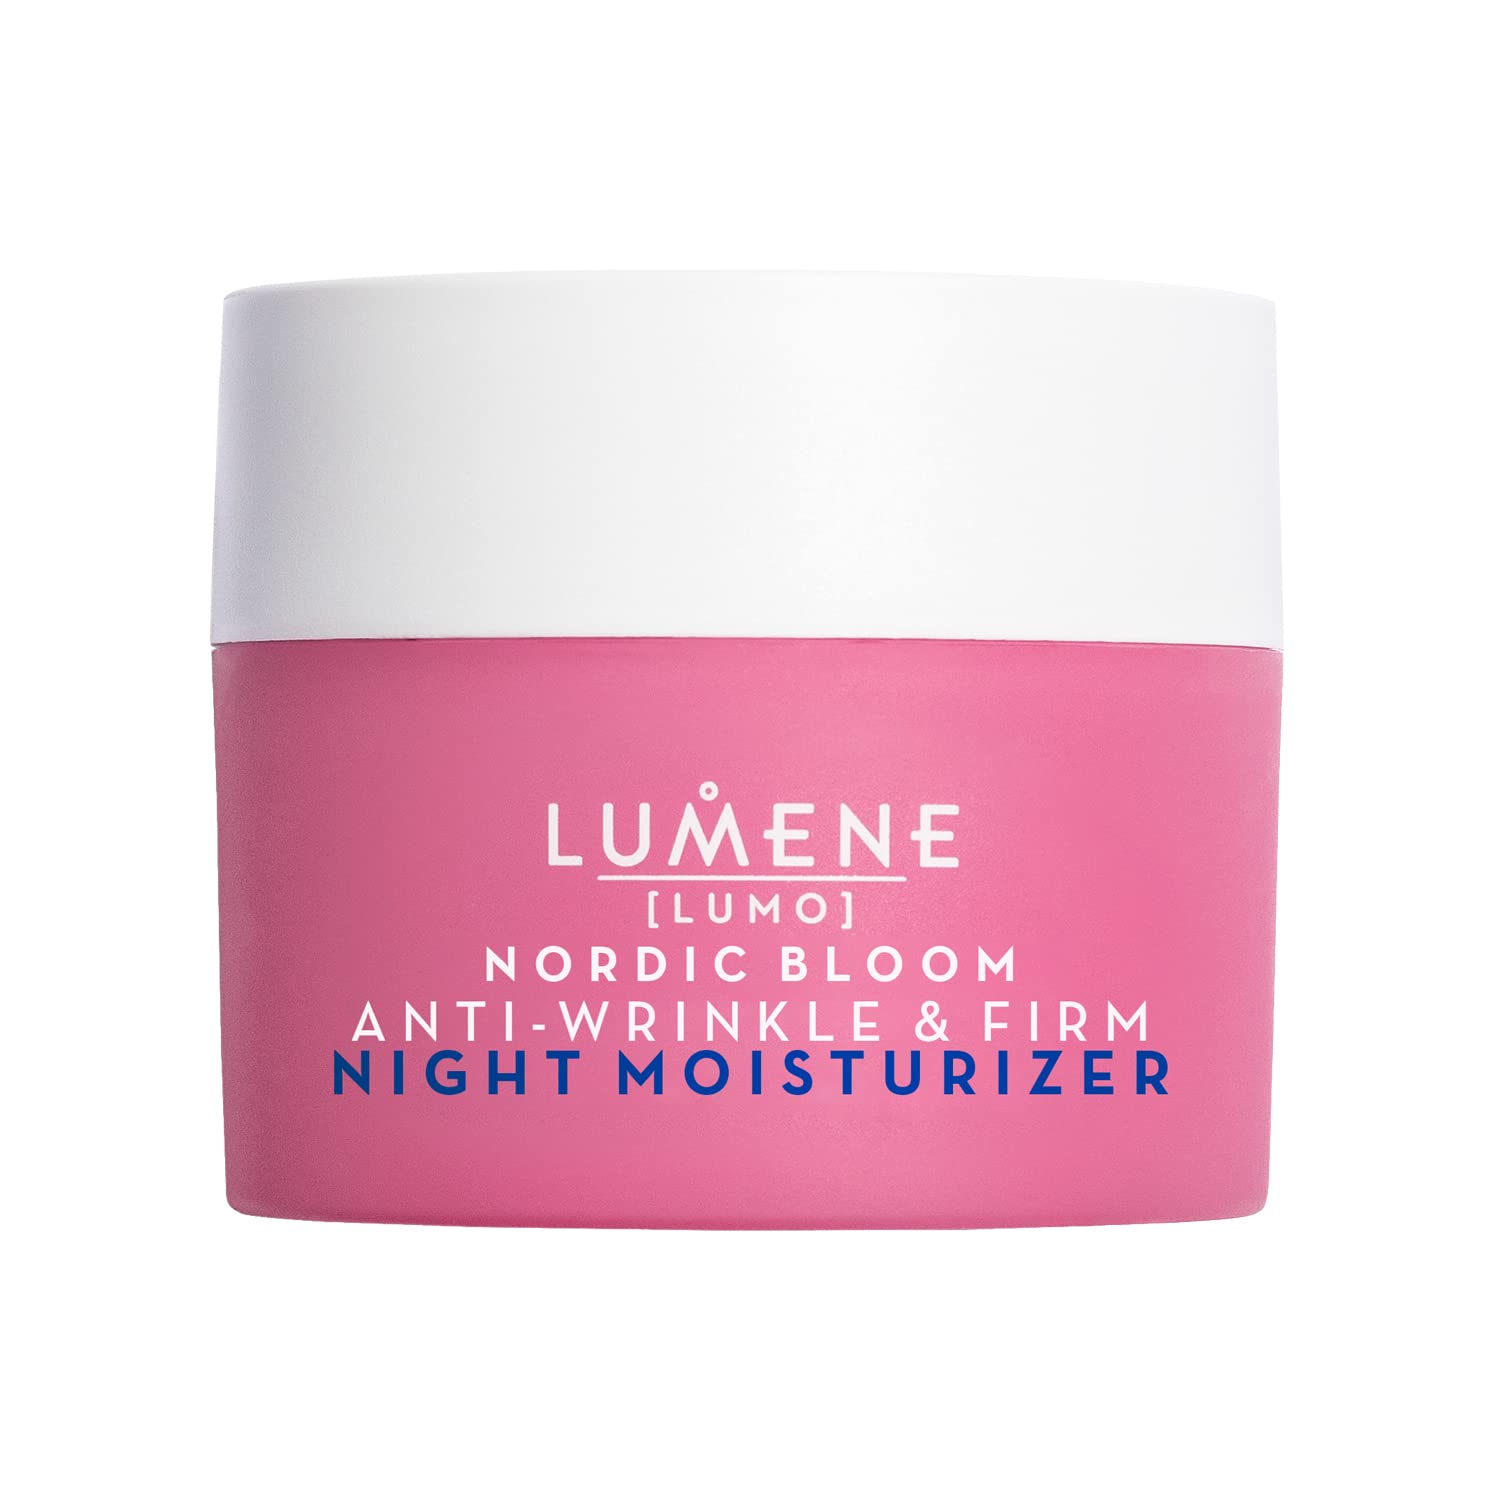 Lumene Anti Wrinkle & Firm Night Moisturizer - Nordic Berry Pre Retinol Night Cream to Reduce Appearance of Fine Lines and Wrinkles - Anti Aging Skin Care Face & Neck Cream (50)